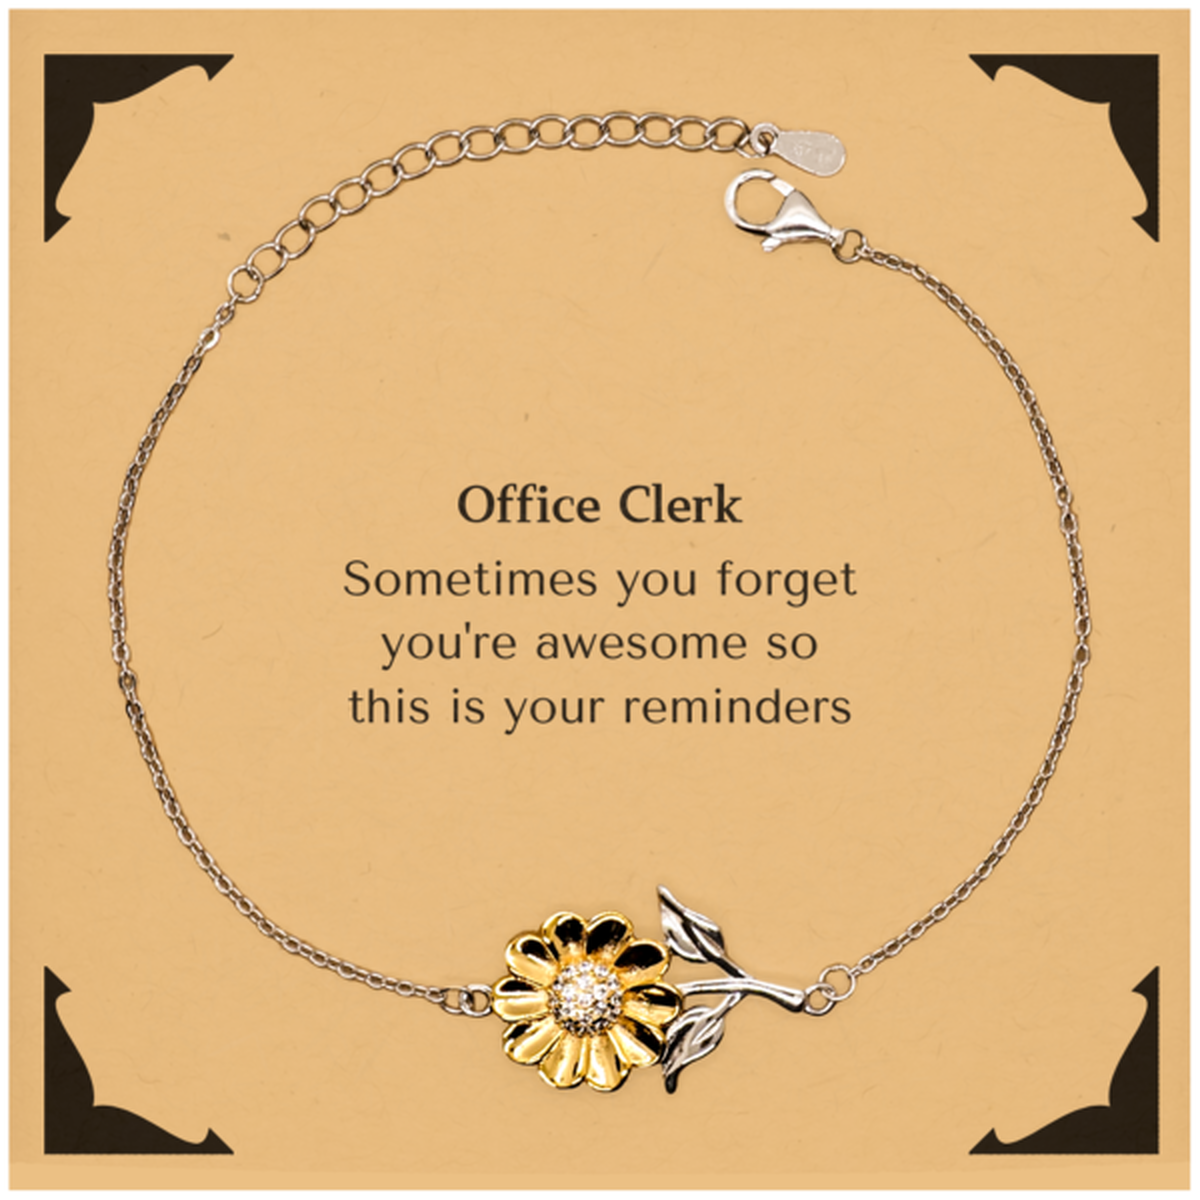 Sentimental Office Clerk Sunflower Bracelet, Office Clerk Sometimes you forget you're awesome so this is your reminders, Graduation Christmas Birthday Gifts for Office Clerk, Men, Women, Coworkers